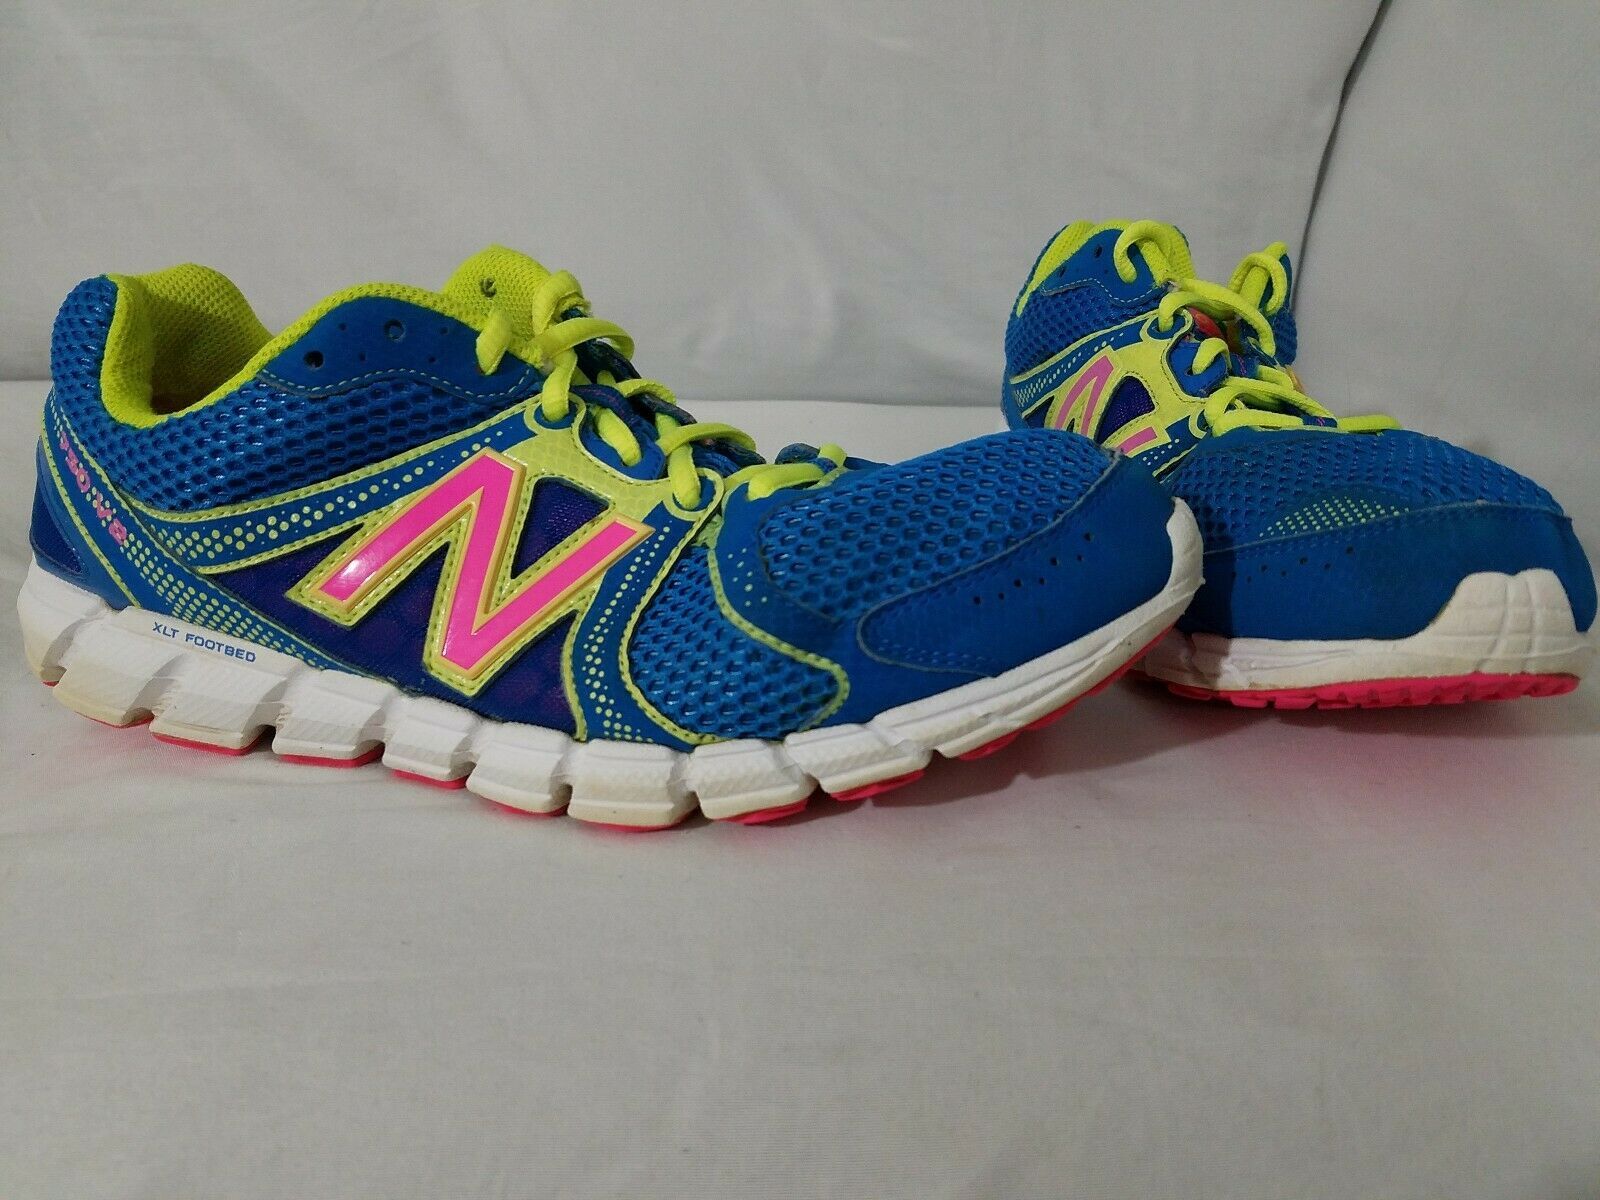 New Balance 750 V2 Running Shoes Size 11 Wide, Women's Blue XLT Footbed ...